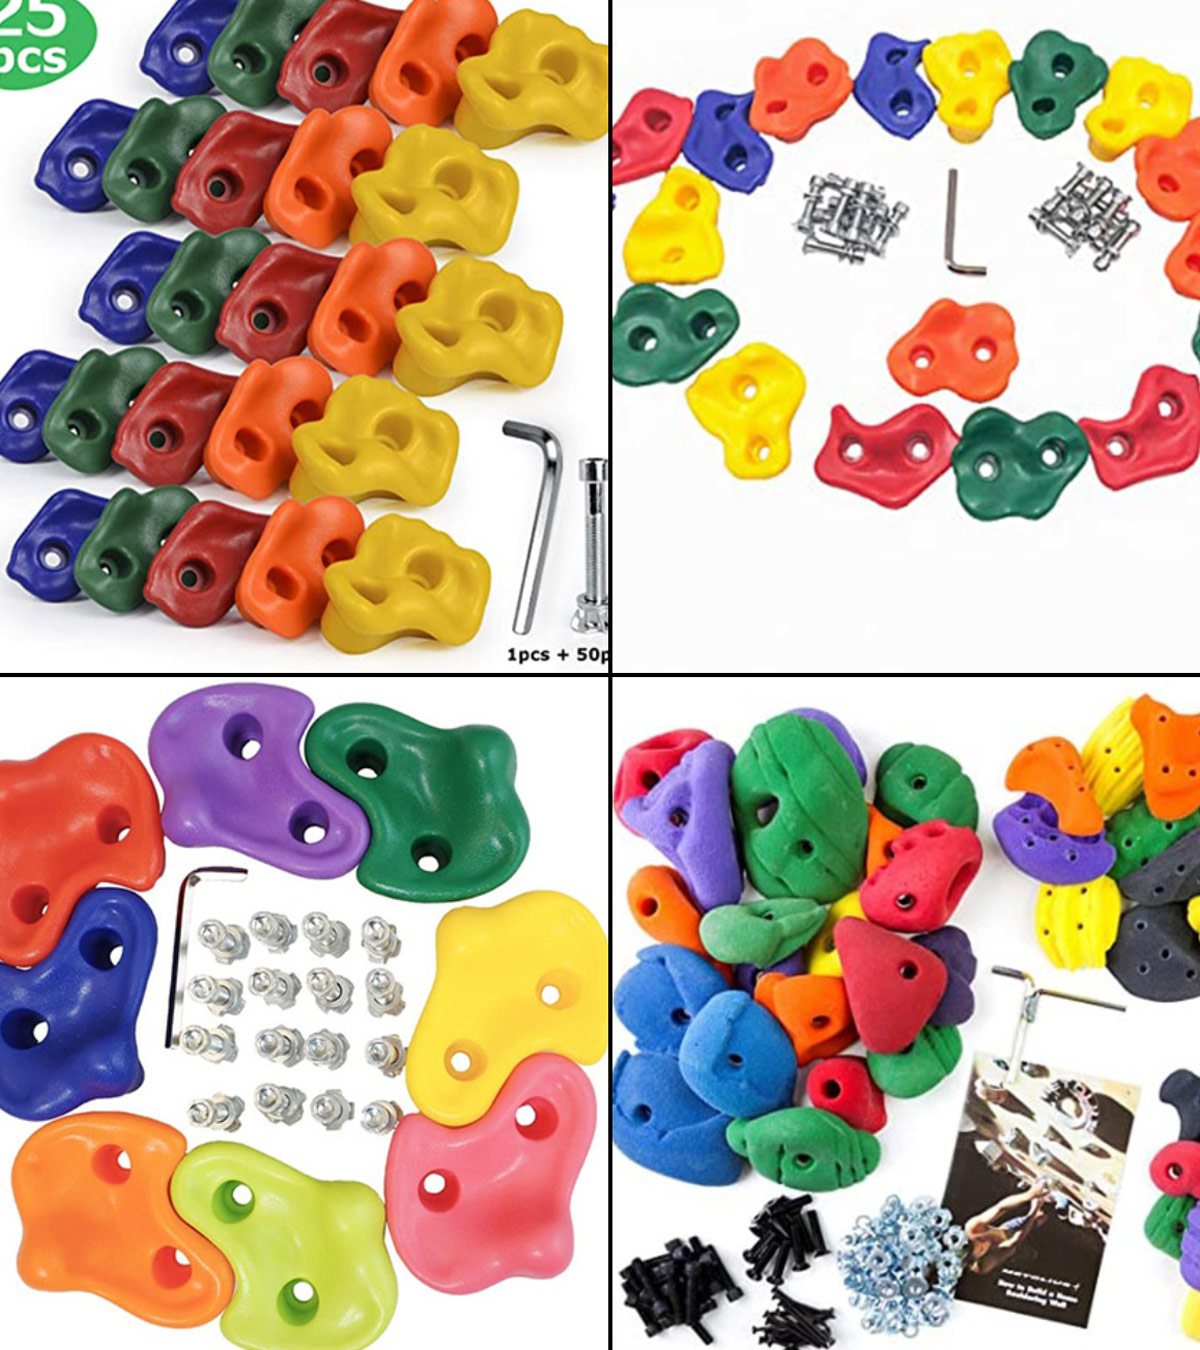 11 Best Climbing Holds For Rock Climbing At Home & Outdoor In 2023